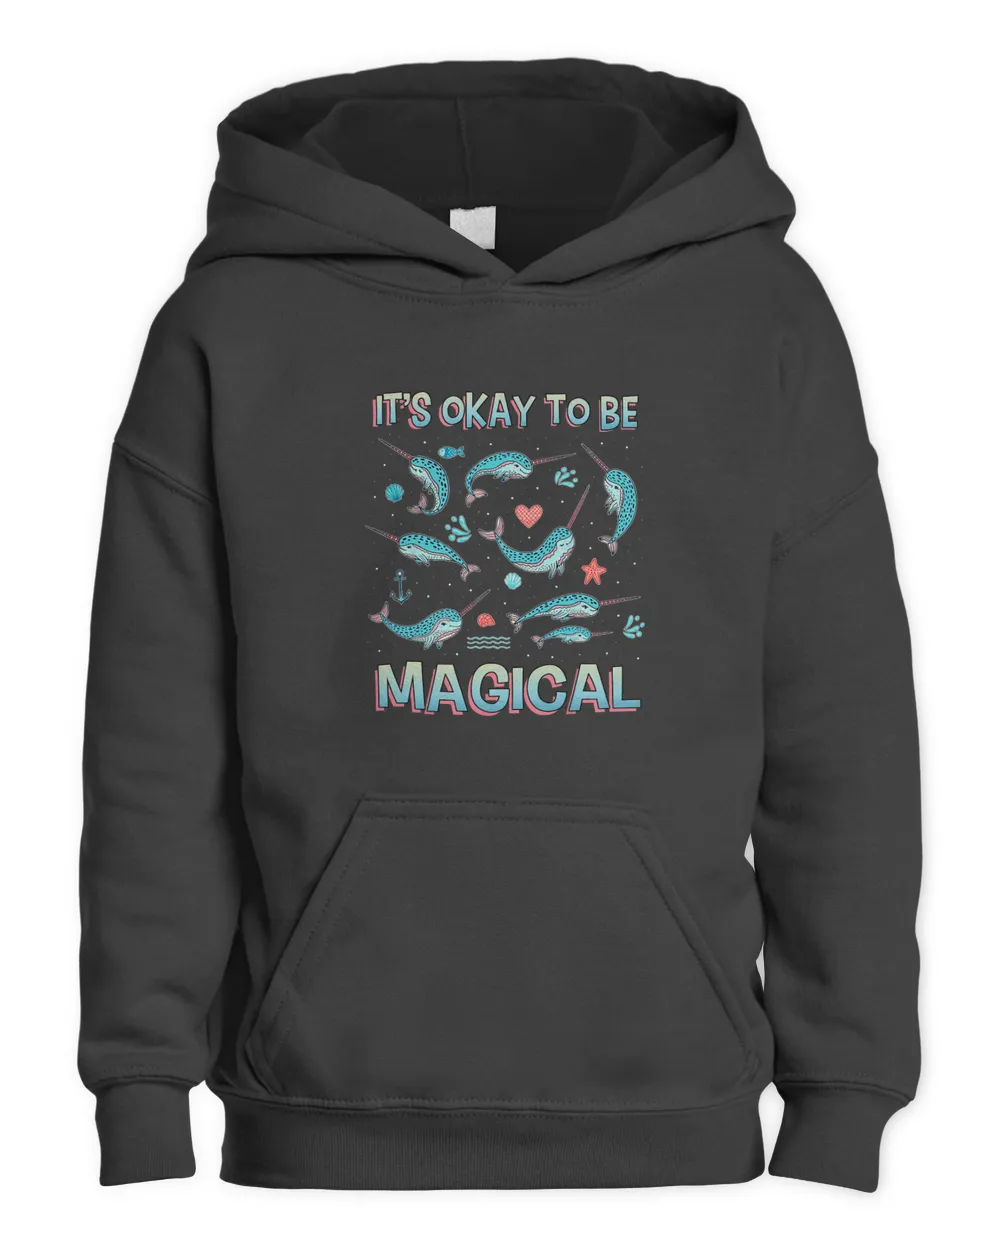 Narwhal Lover Narwal Gifts For Girls Mens Narwhal Clothing Stuff Kids Boys 21